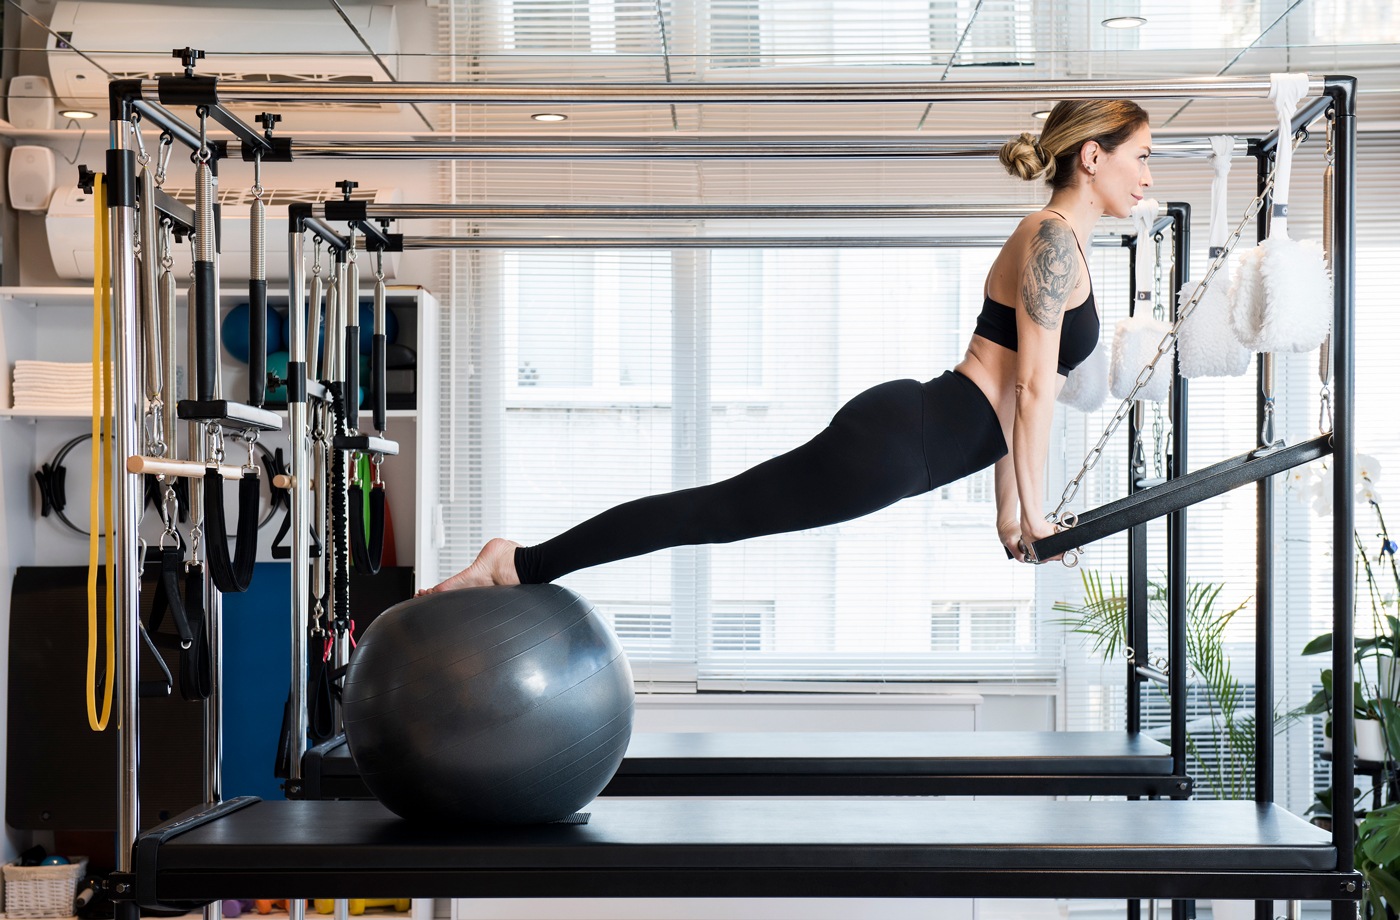 Get in an intense workout *anywhere* using this completely collapsable Pilates reformer